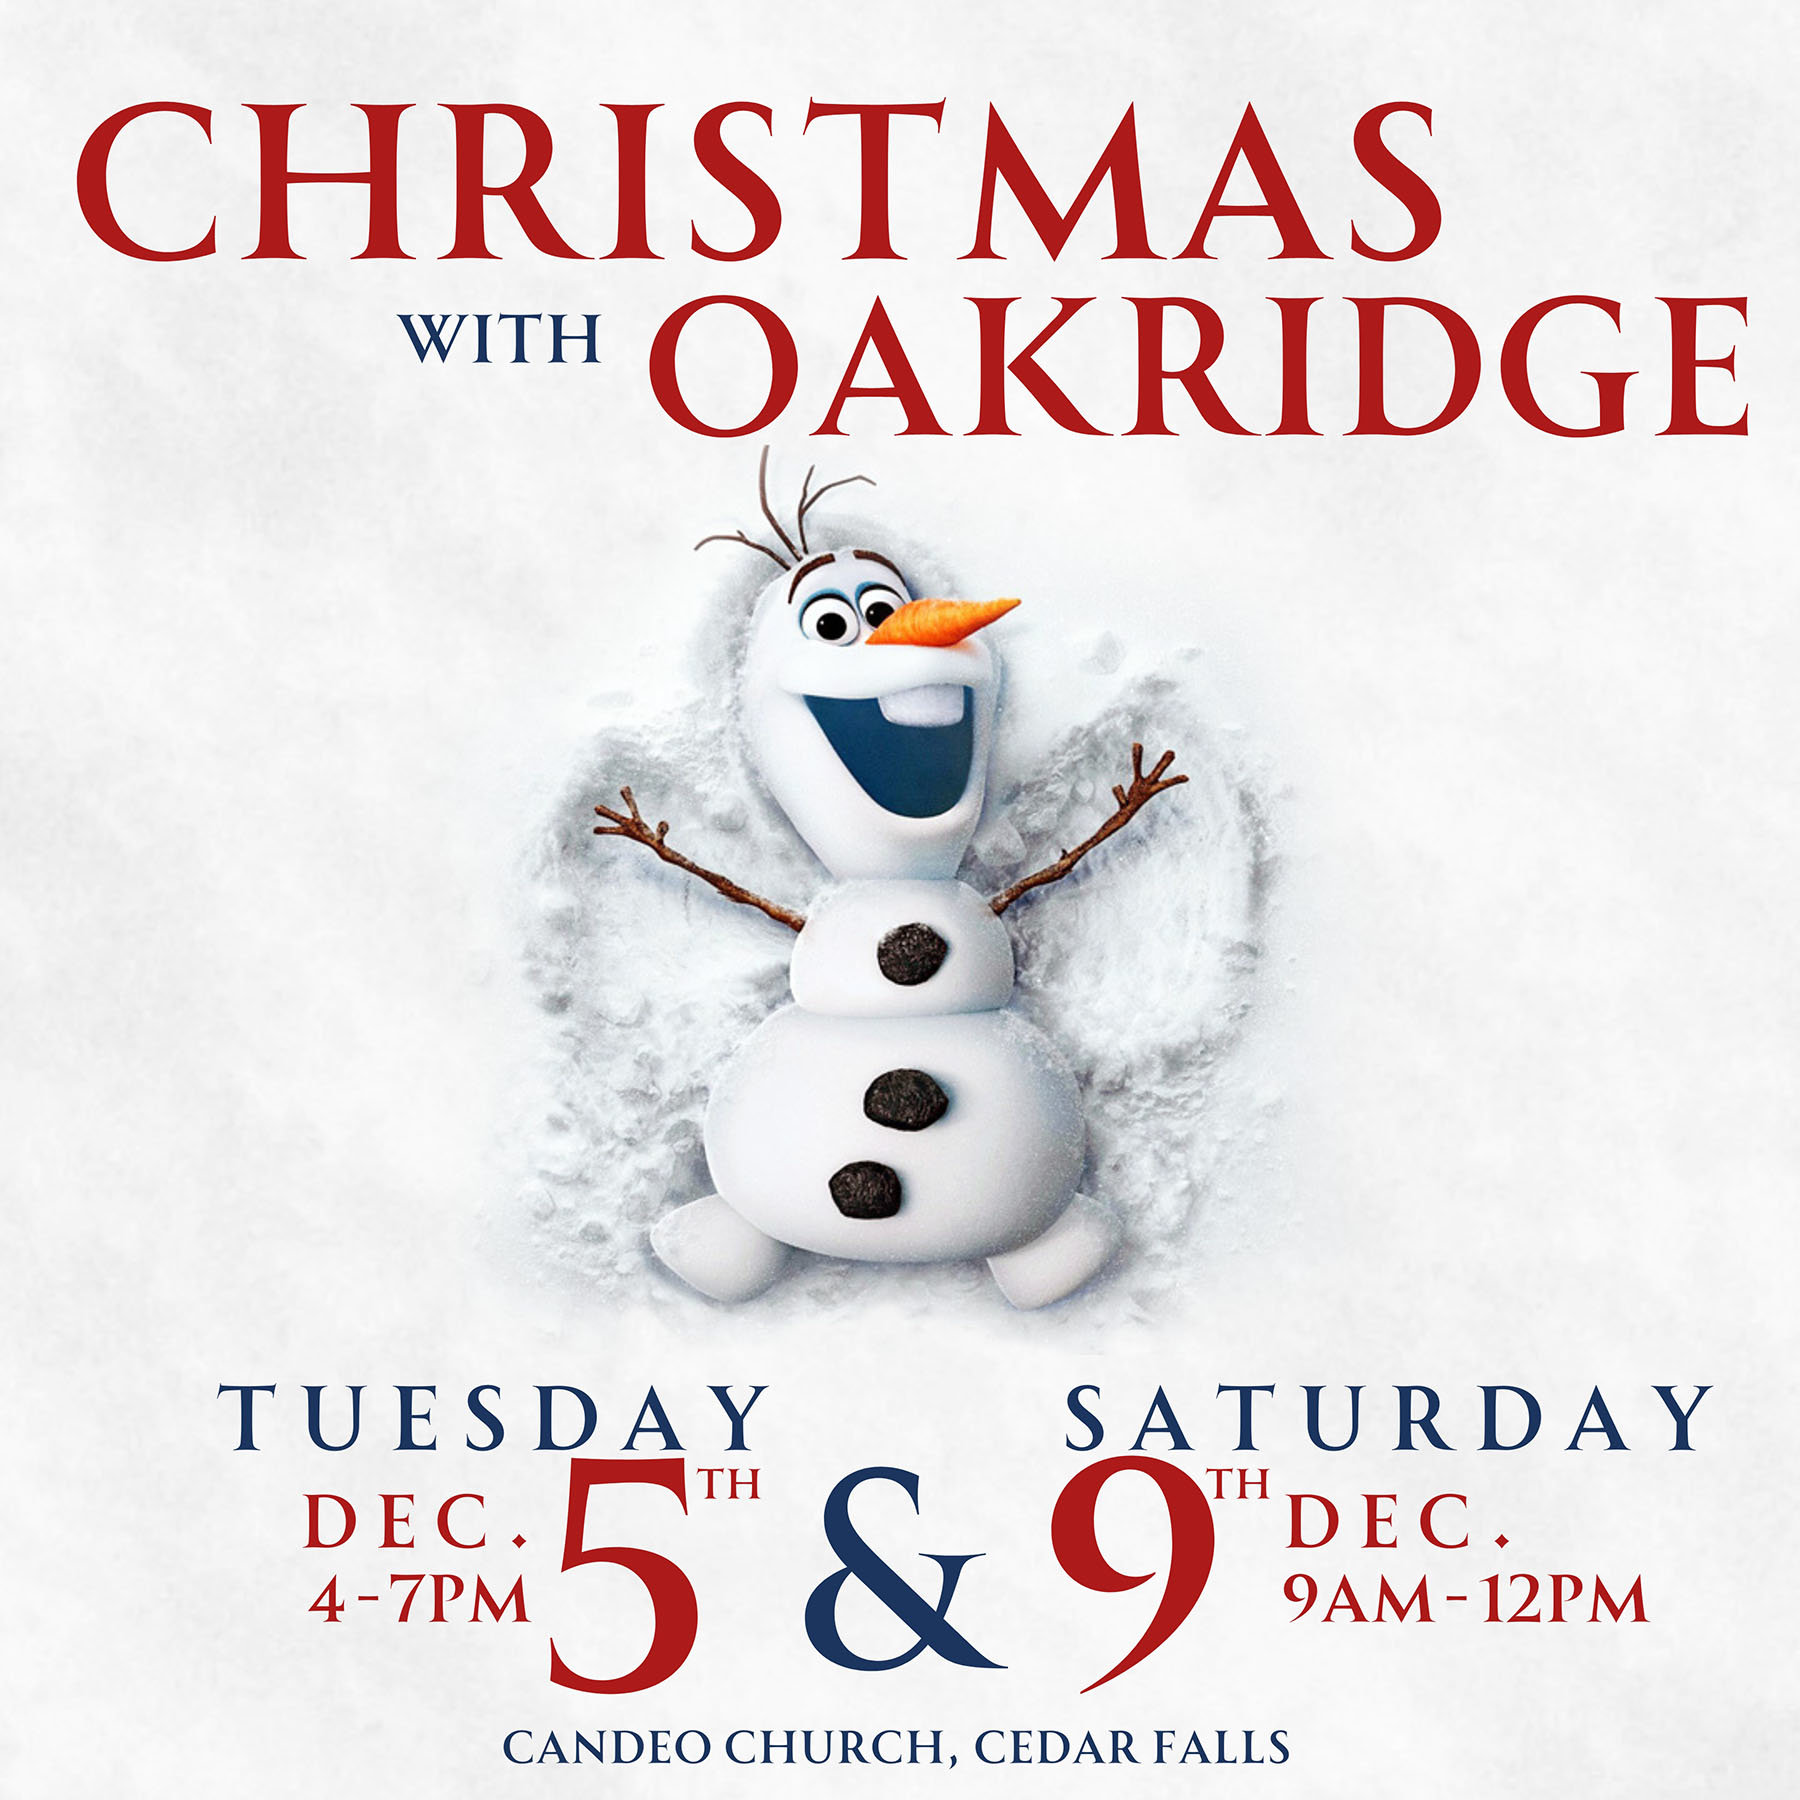 2023 chirstmas with oakridge event